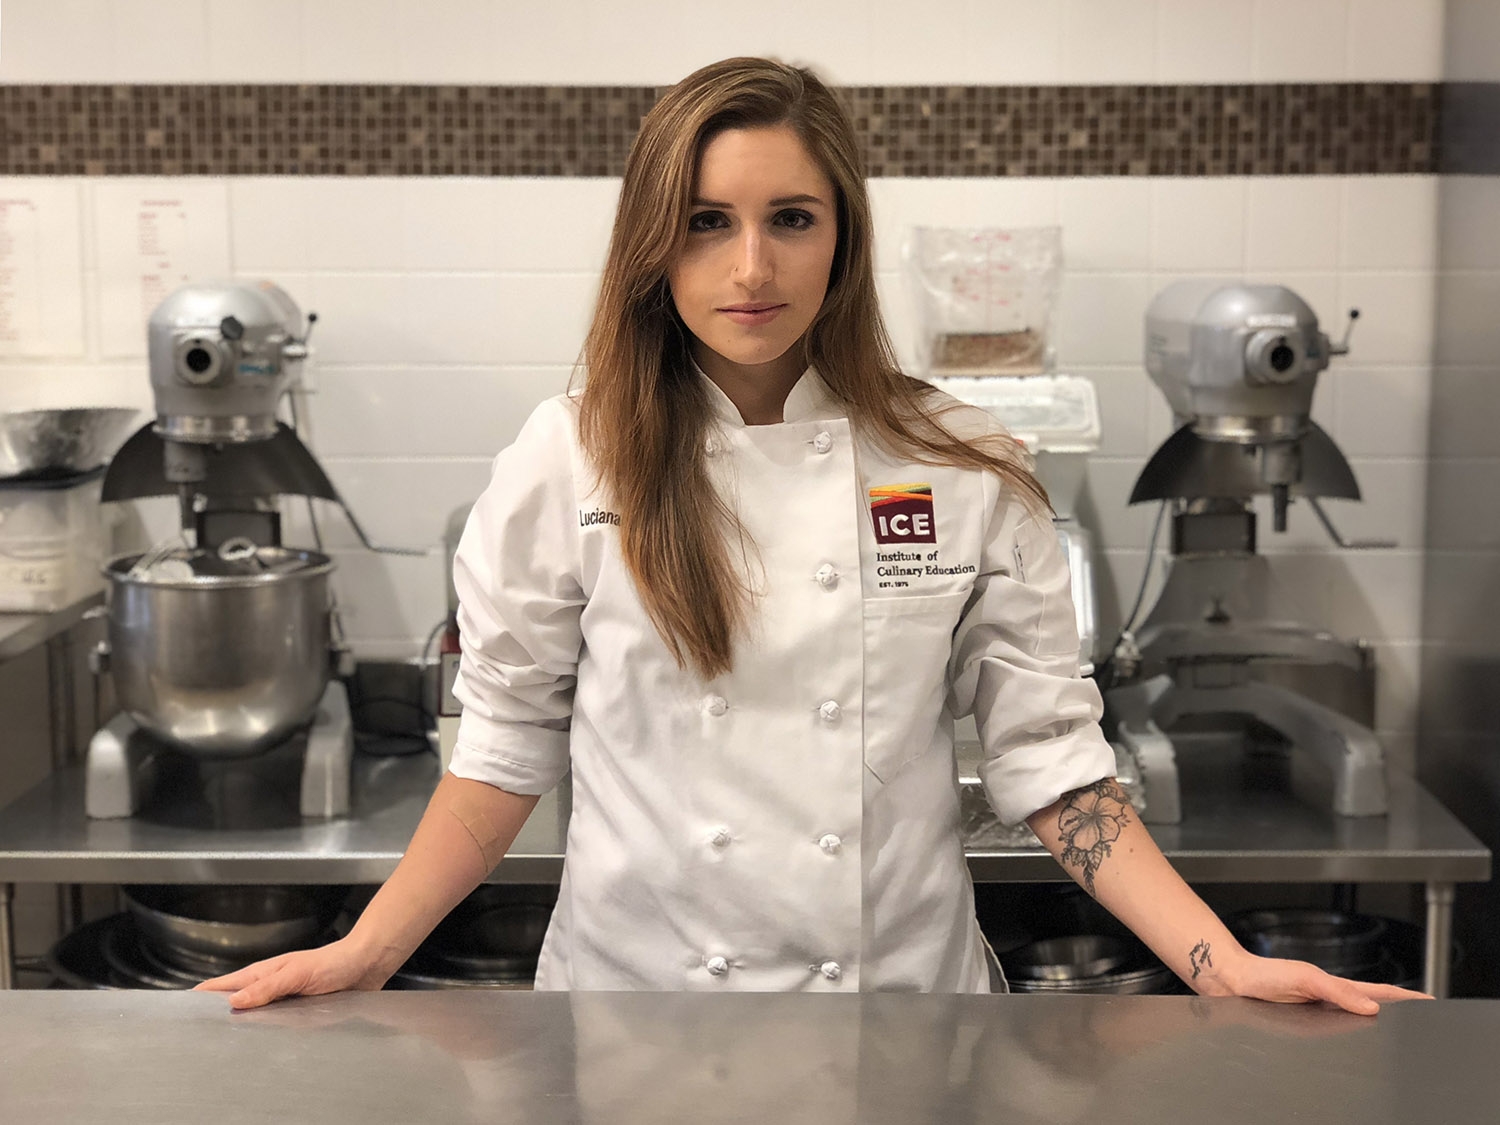 Luciana Colletti is studying Pastry & Baking Arts at ICE.